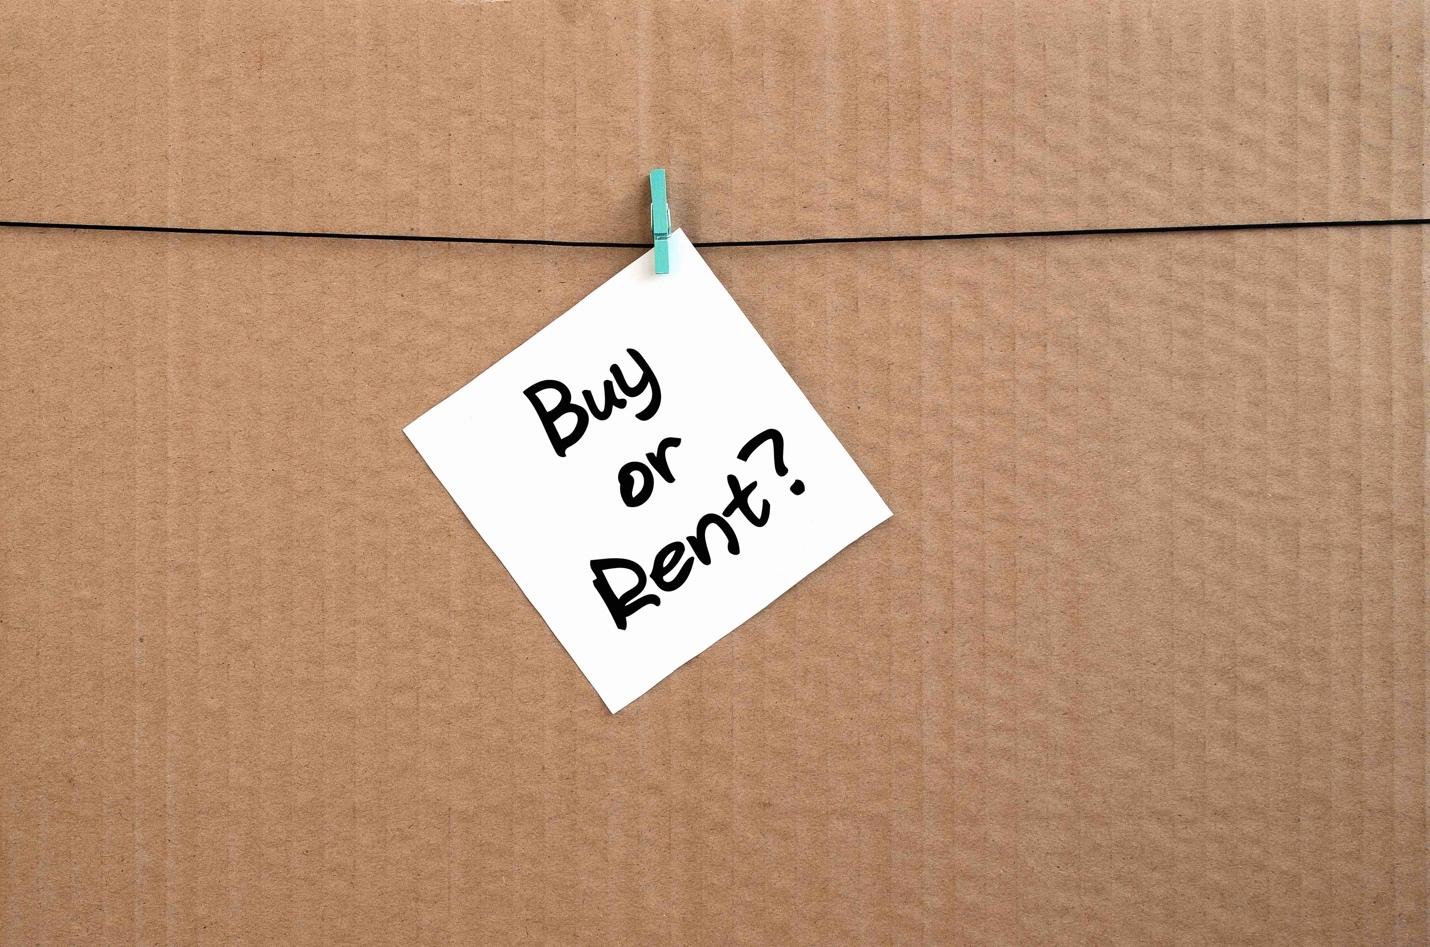 A sticky note that says "buy or rent?" on a cardboard box